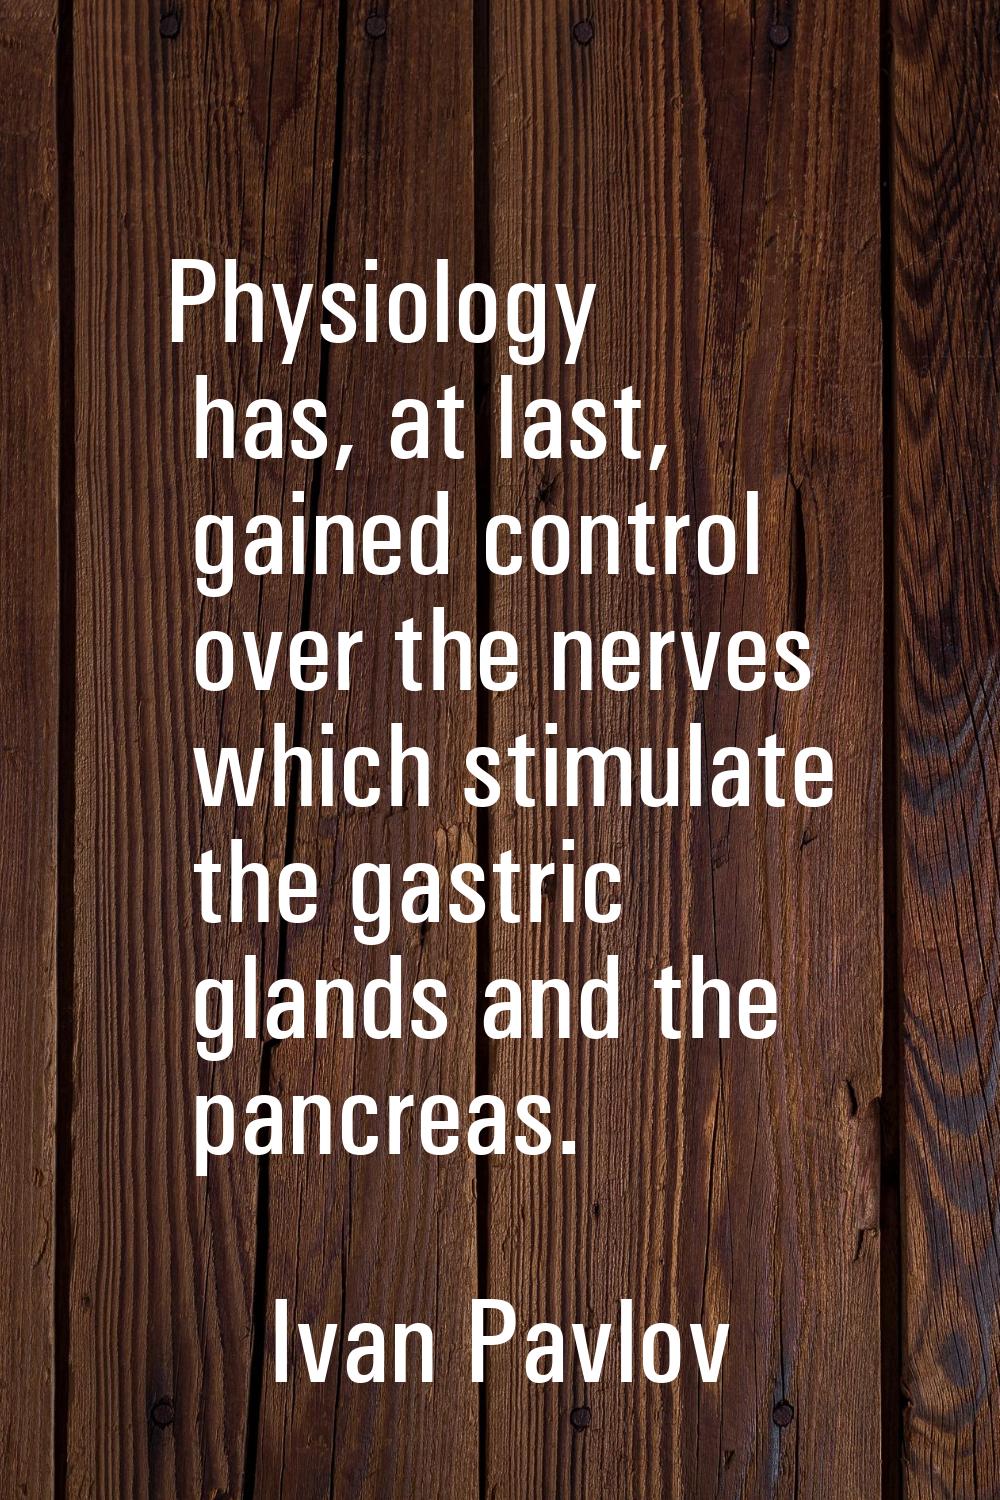 Physiology has, at last, gained control over the nerves which stimulate the gastric glands and the 